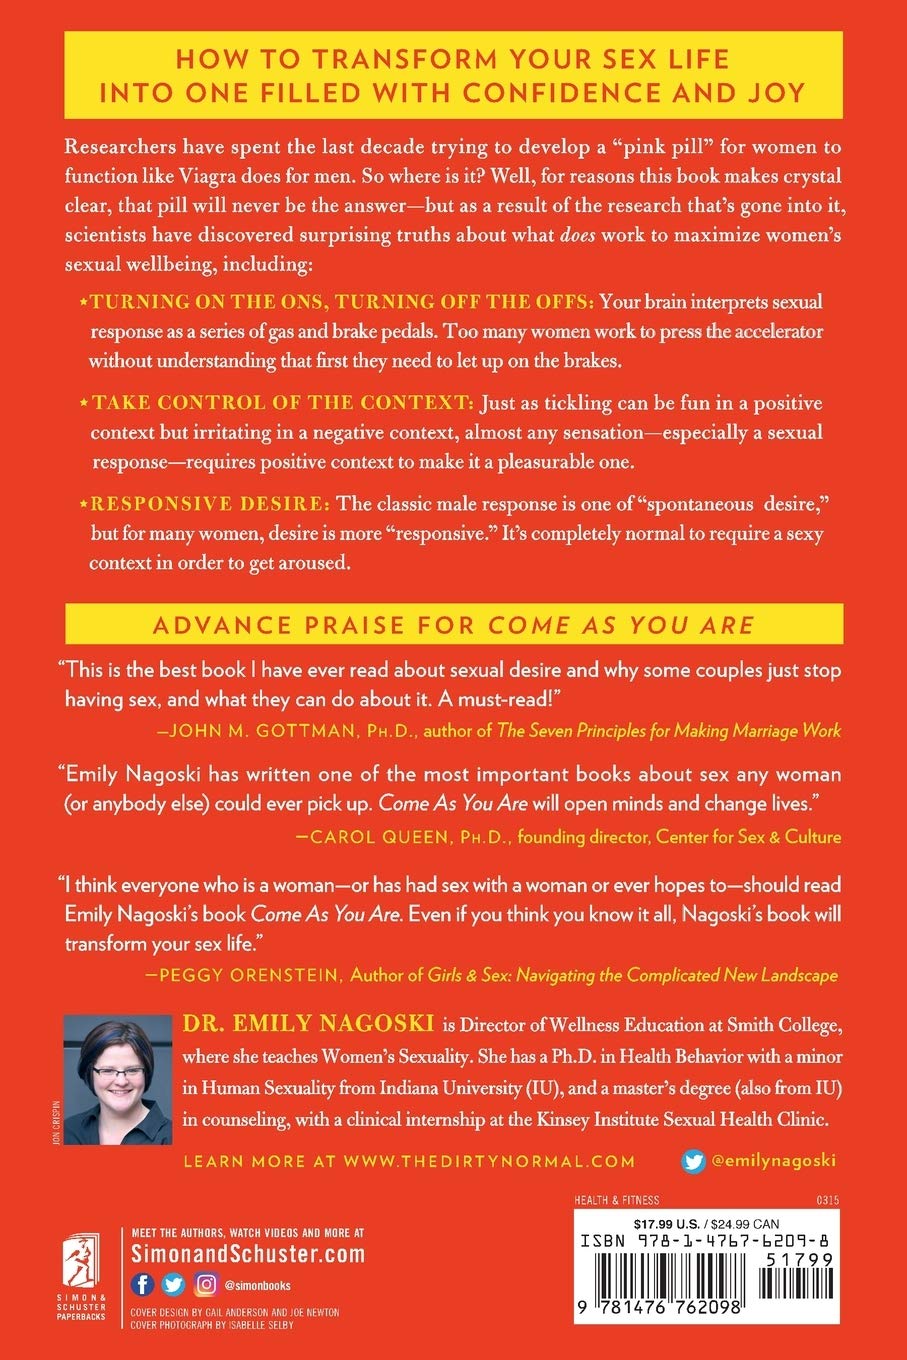 The back cover of Come as You Are by Emily Nagoski.